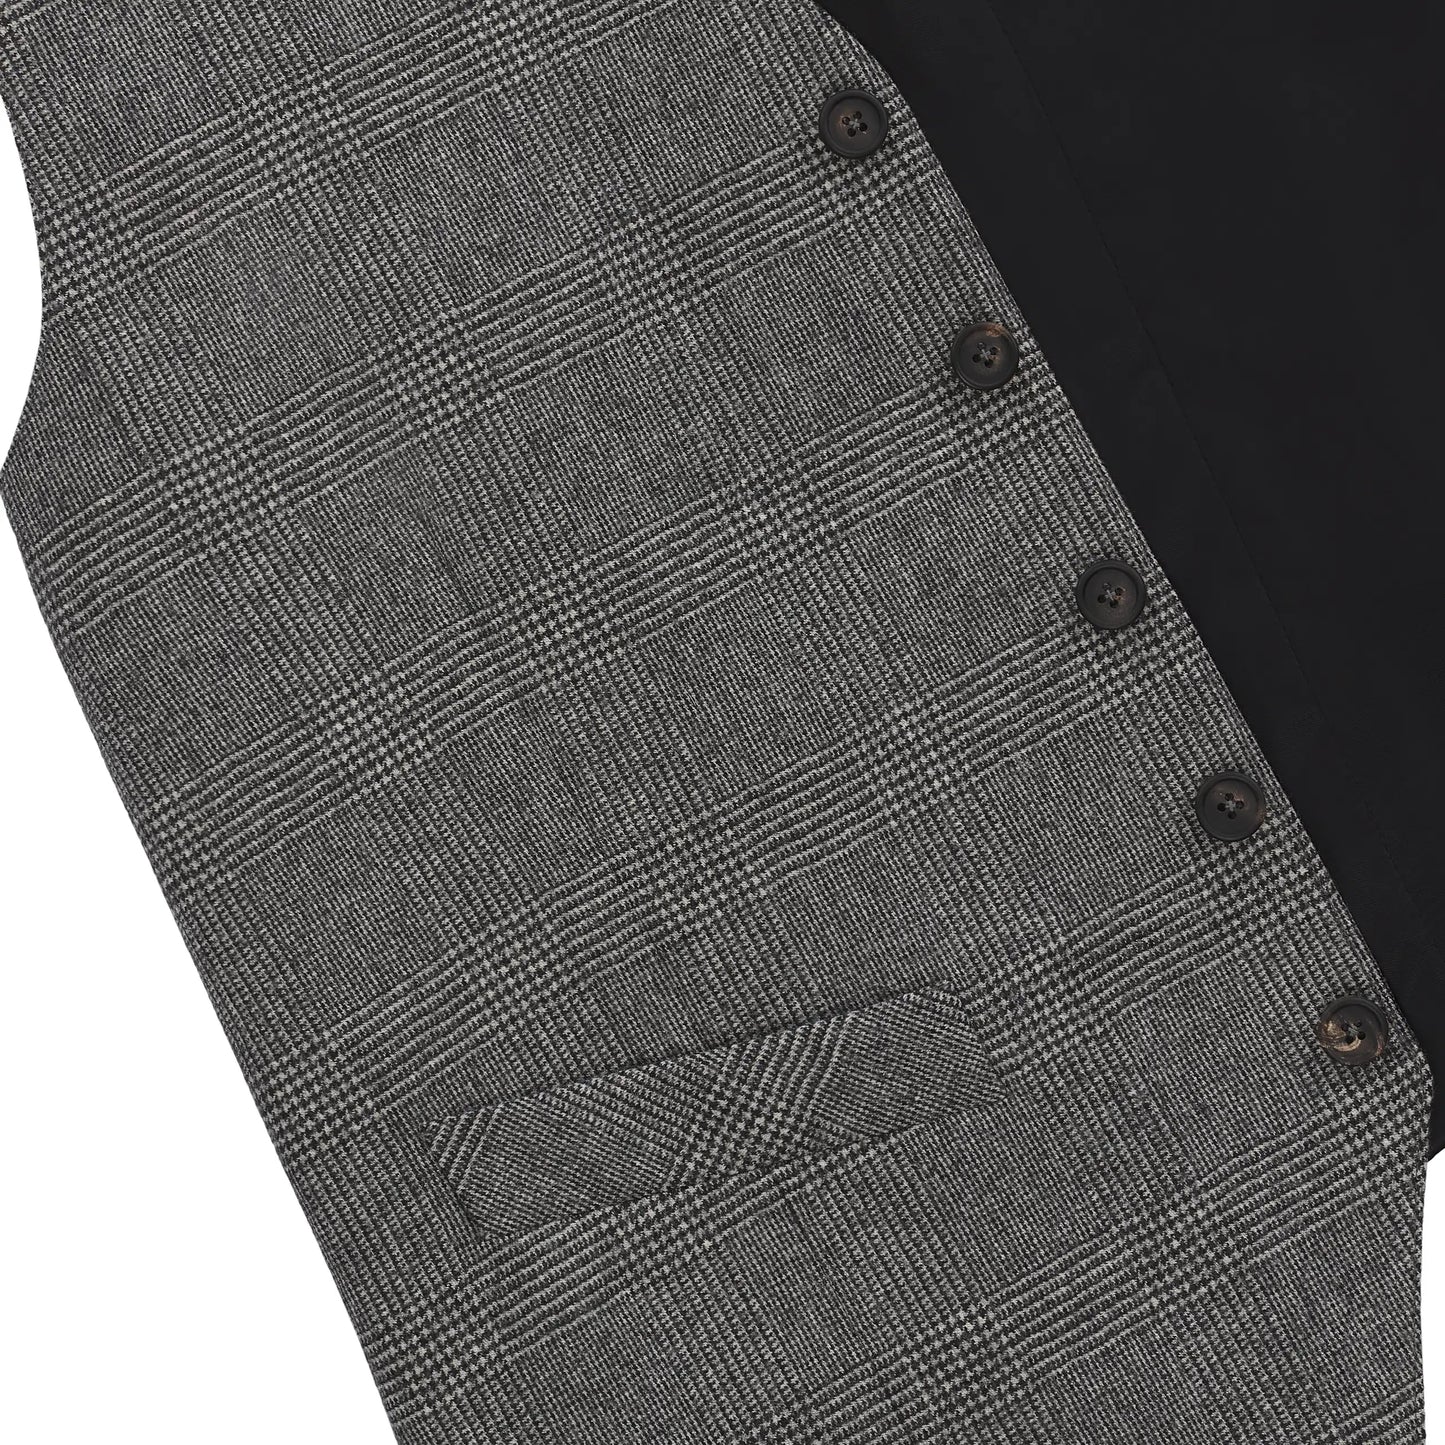 Rota Classic Wool and Cashmere Waistcoat in Grey - SARTALE